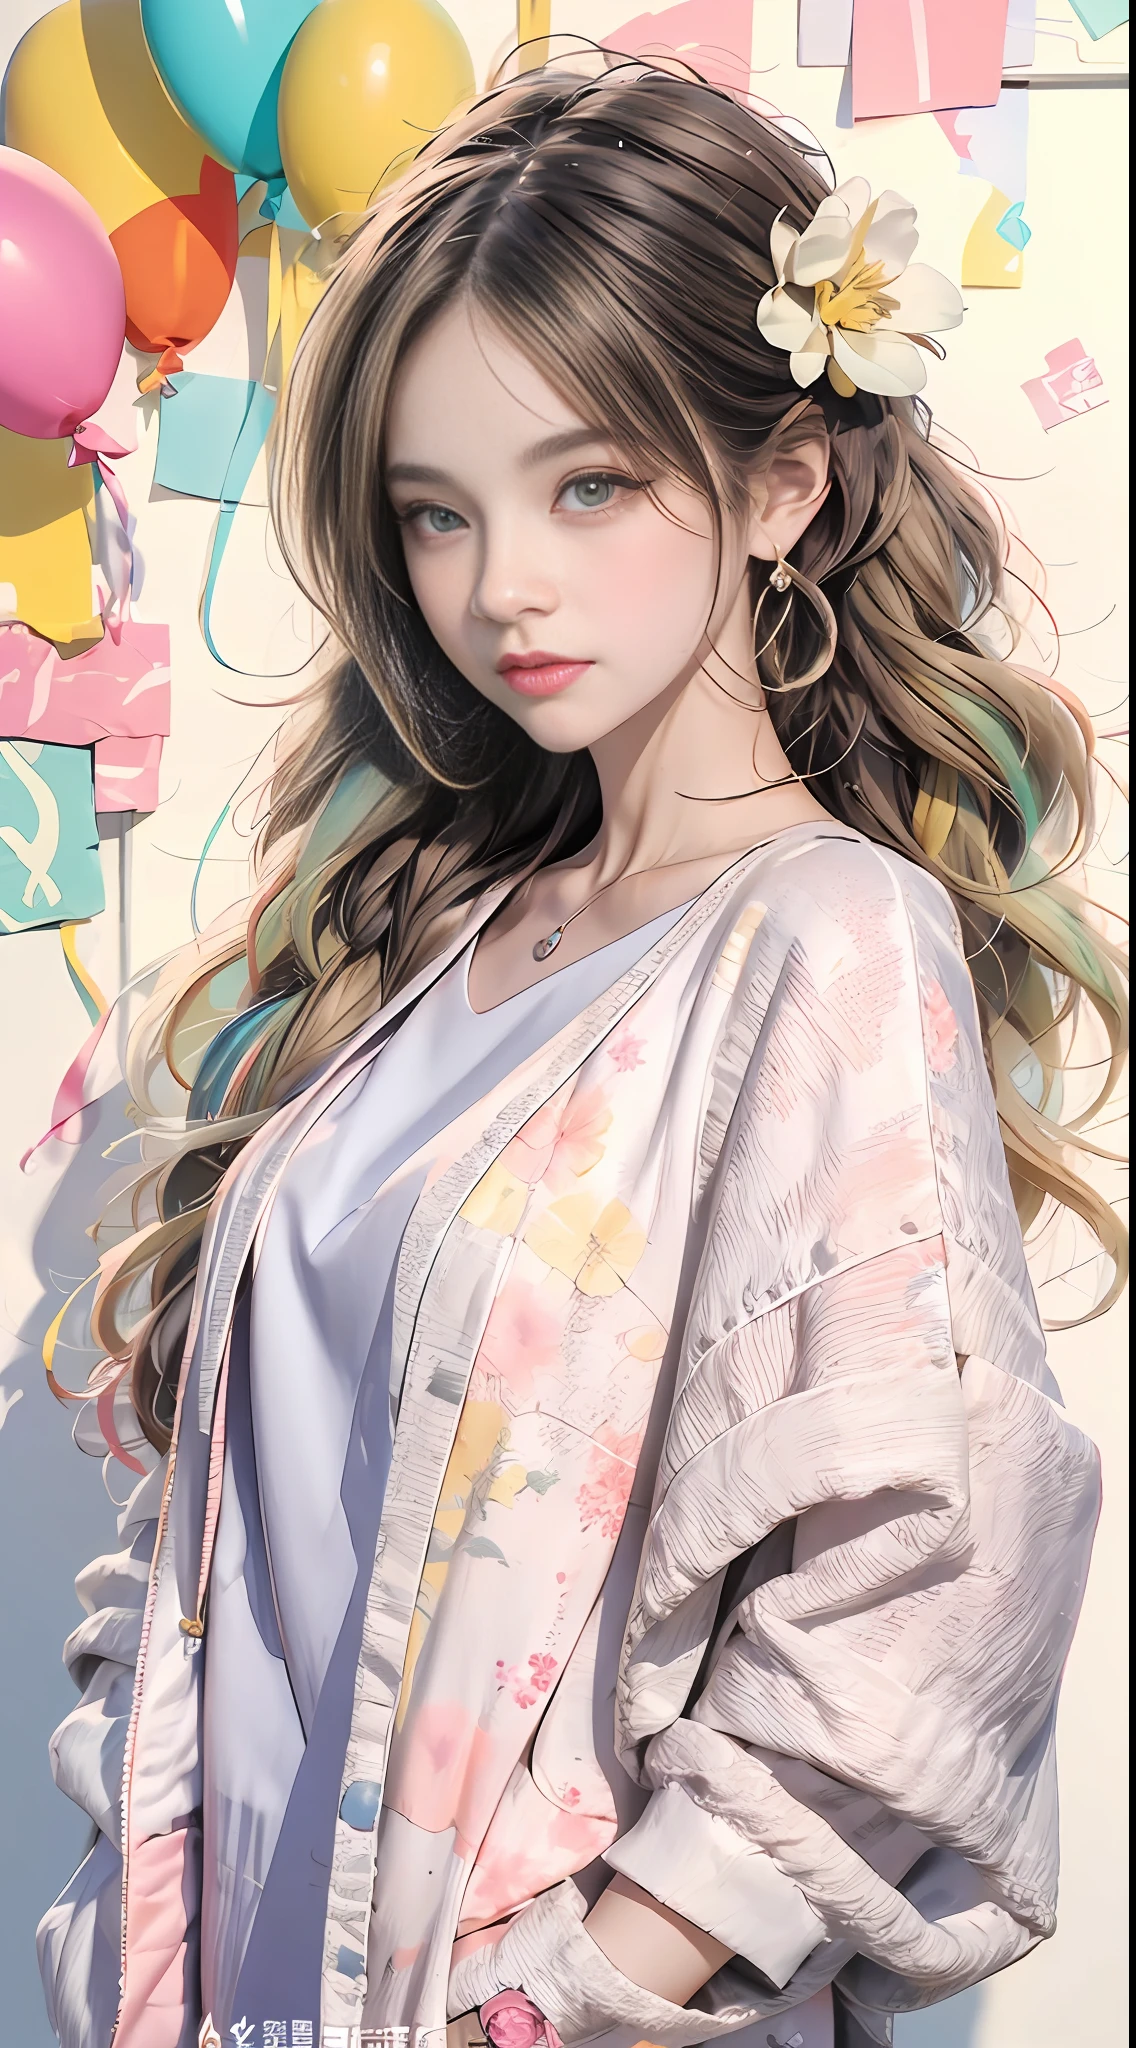  Girl，A pair of peach blossom eyes，prettyandcute，flower ring，Yellow jacket，White sweatshirt，Lots of colored bubbles，Royal sister face，chibiStyle，There are collarbones，White extra long hair，perfectdetaileyes，Perfect for hand fingers，Delicate face，perfectcg，4k quality，Colorful balloons，skyward，Colorful oil pastels